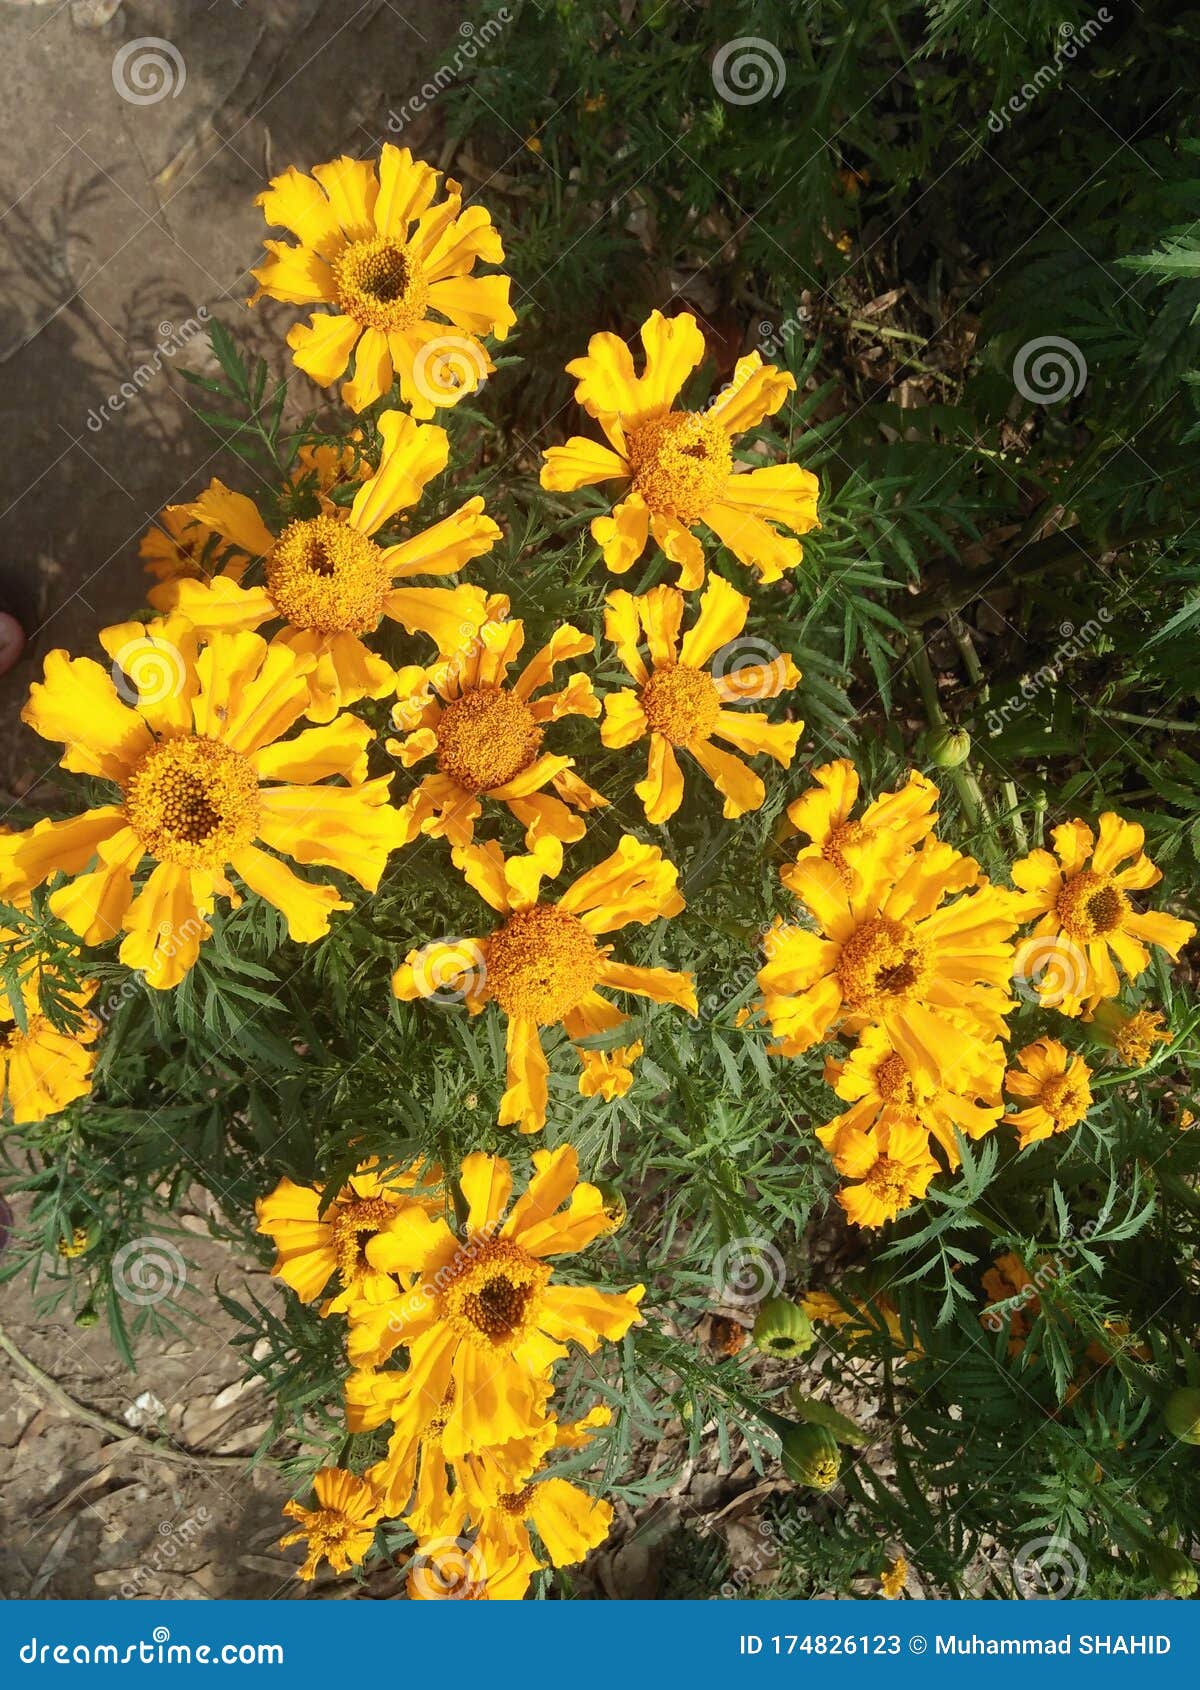 Yellow with Different Petals Flowers in Springs Stock Image - Image of ...